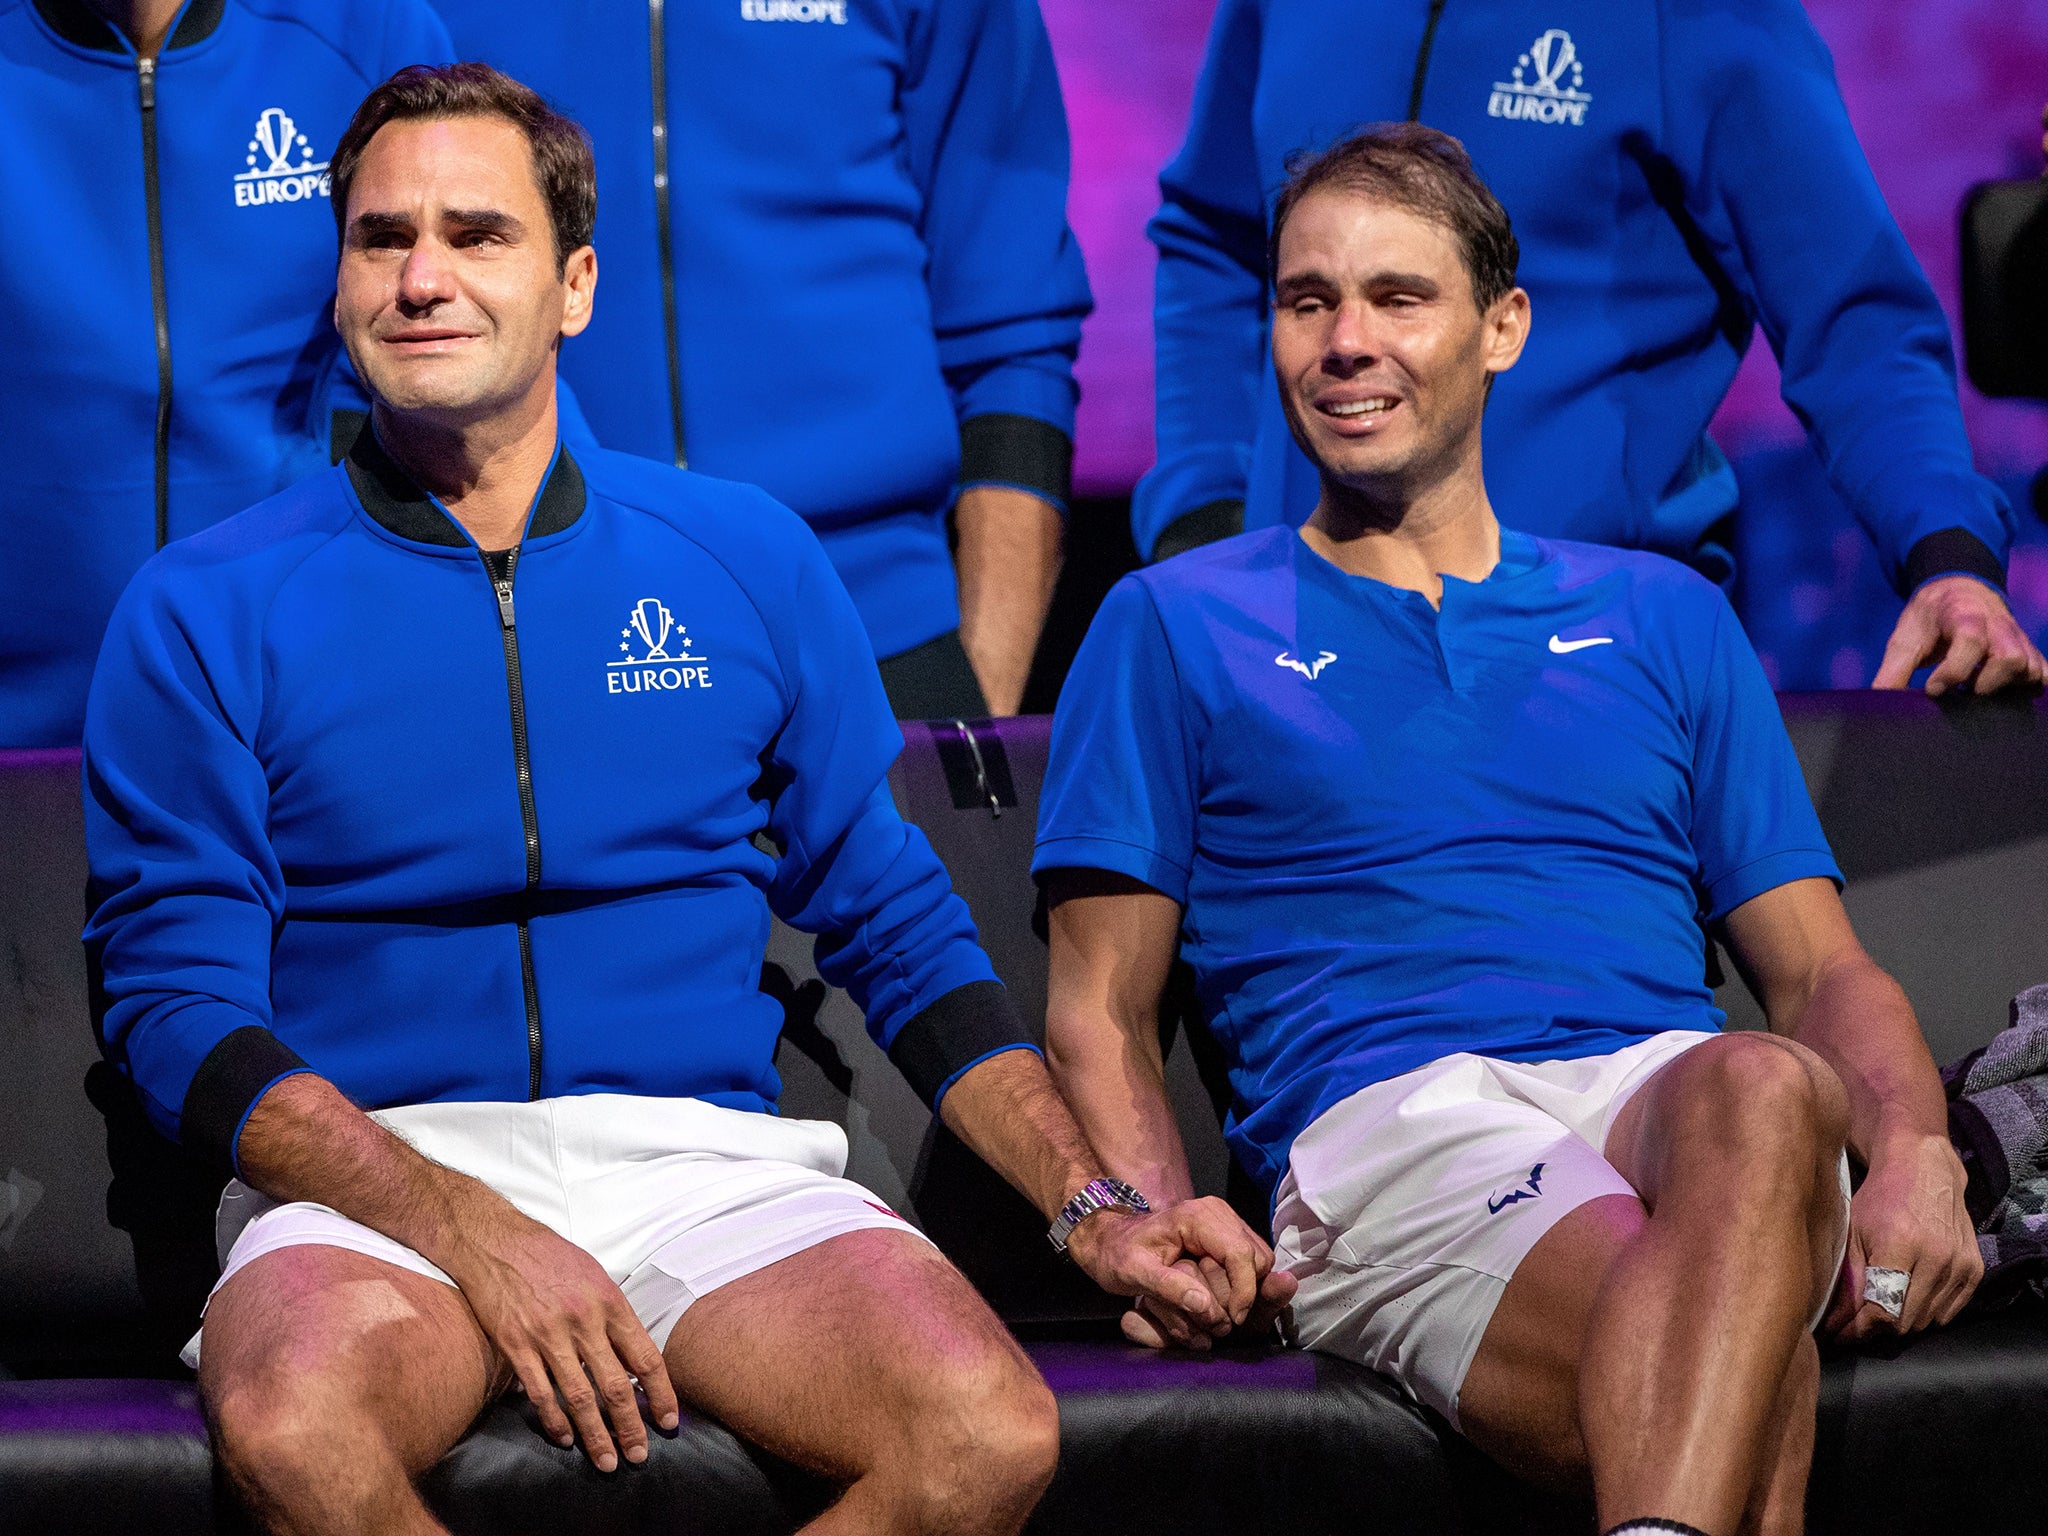 Roger Federer was emotional as he retired from tennis at the Laver Cup